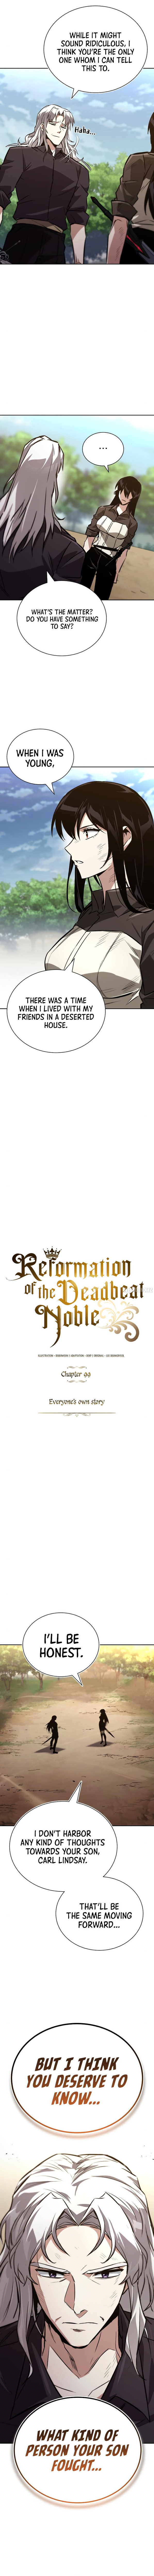 reformation-of-the-deadbeat-noble-chap-99-7